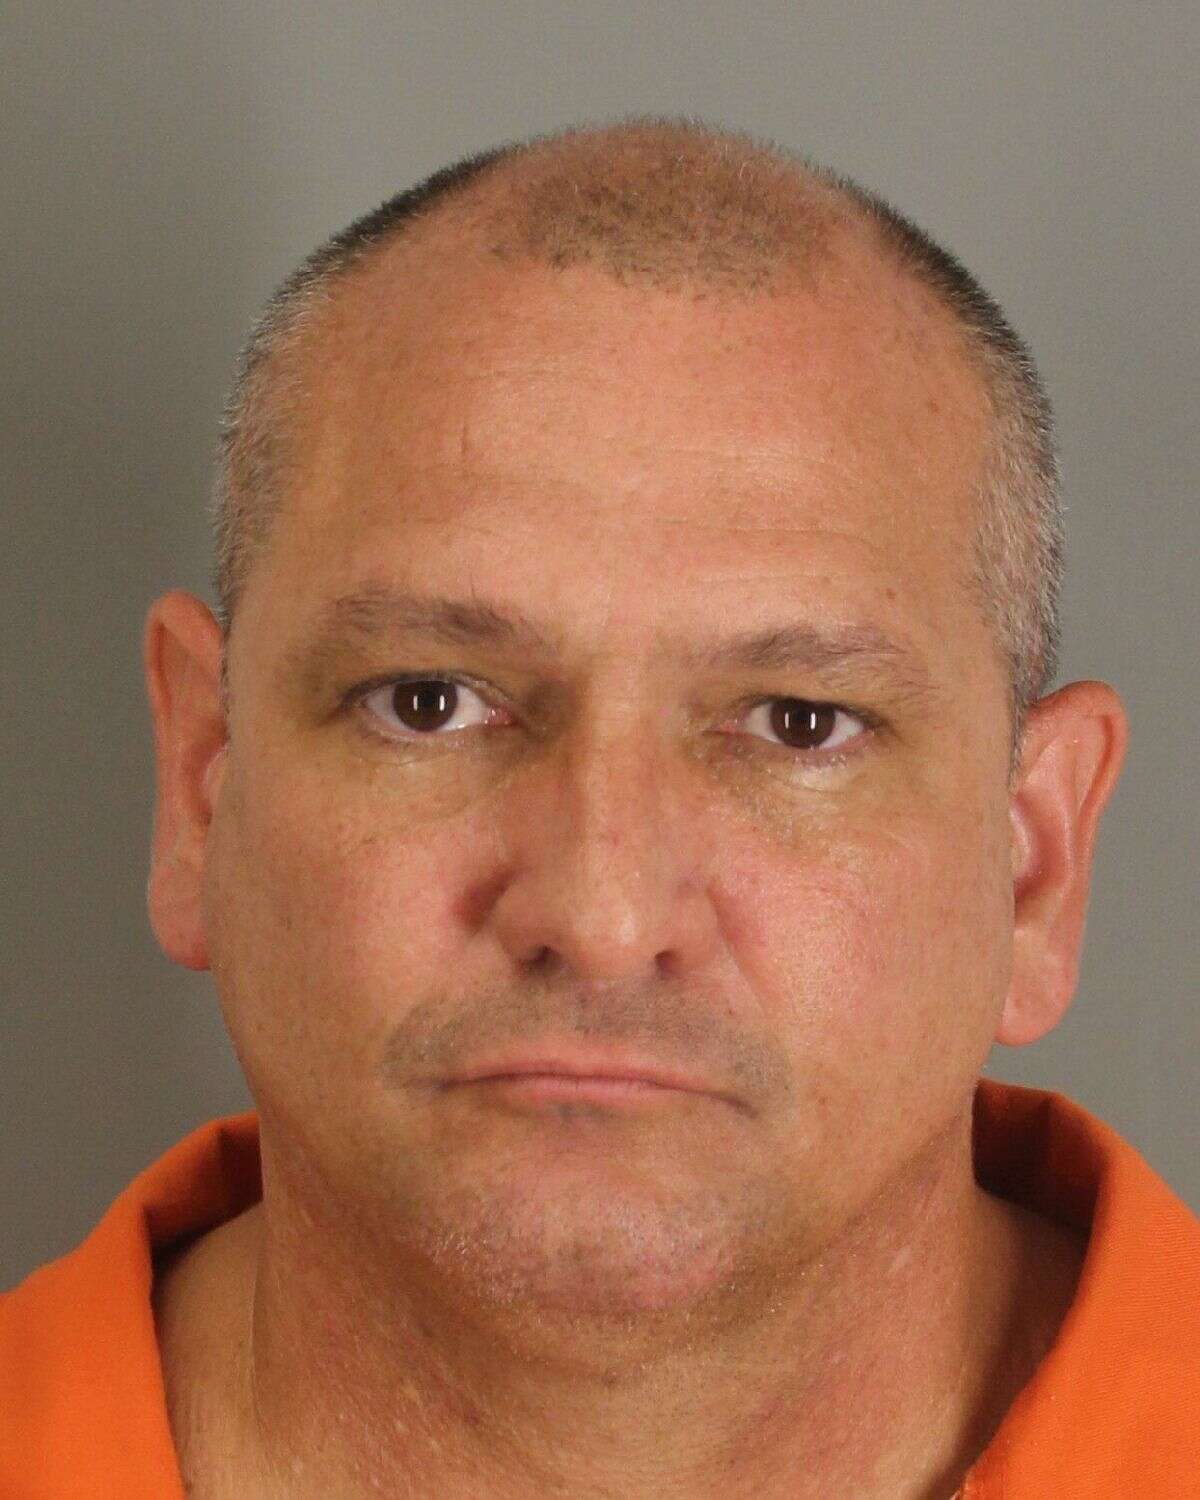 Shane Del Gotte, 48, was arrested for aggravated sexual assault of a child on October 13, 2017. Photo: Jefferson County Sheriff's Office